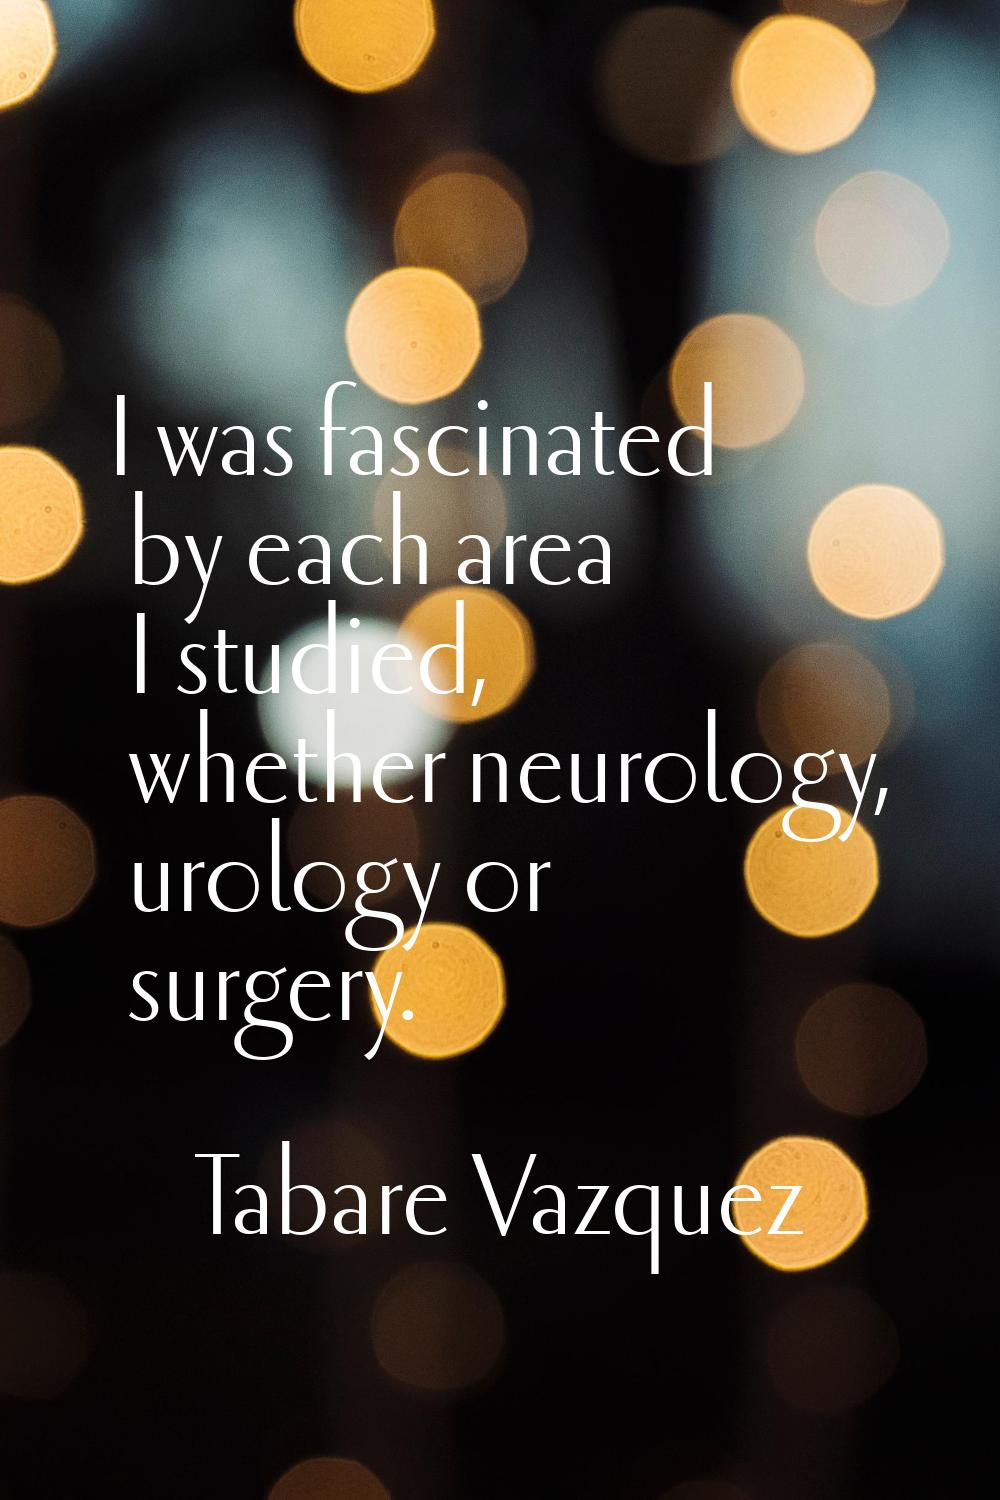 I was fascinated by each area I studied, whether neurology, urology or surgery.